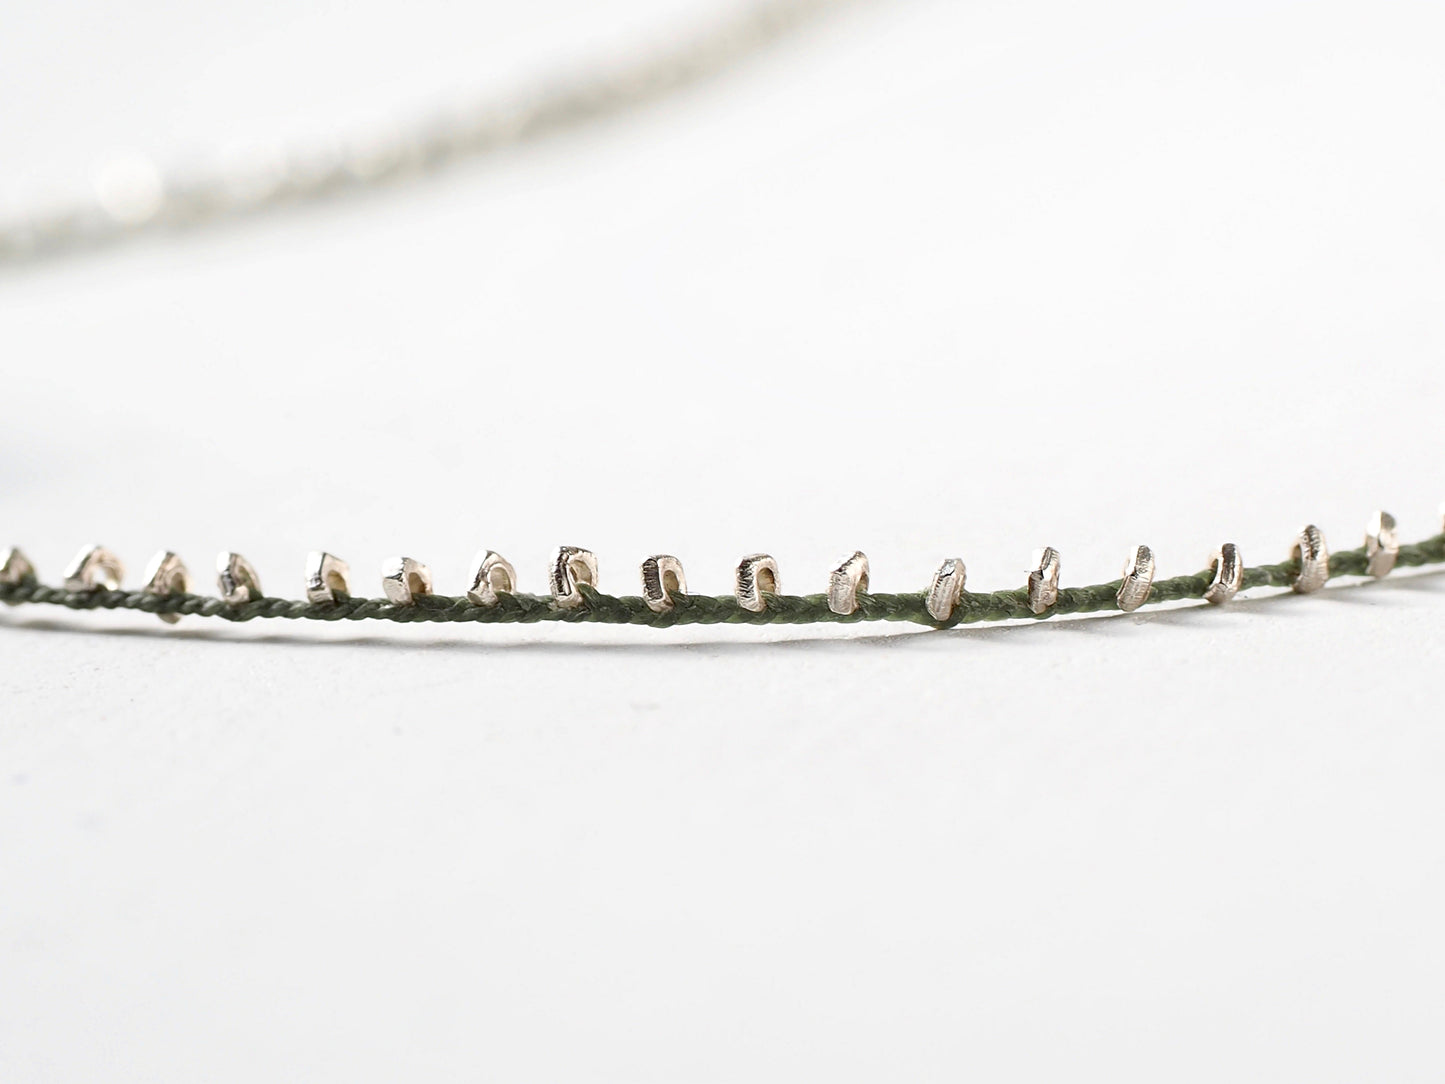 silver top long necklace